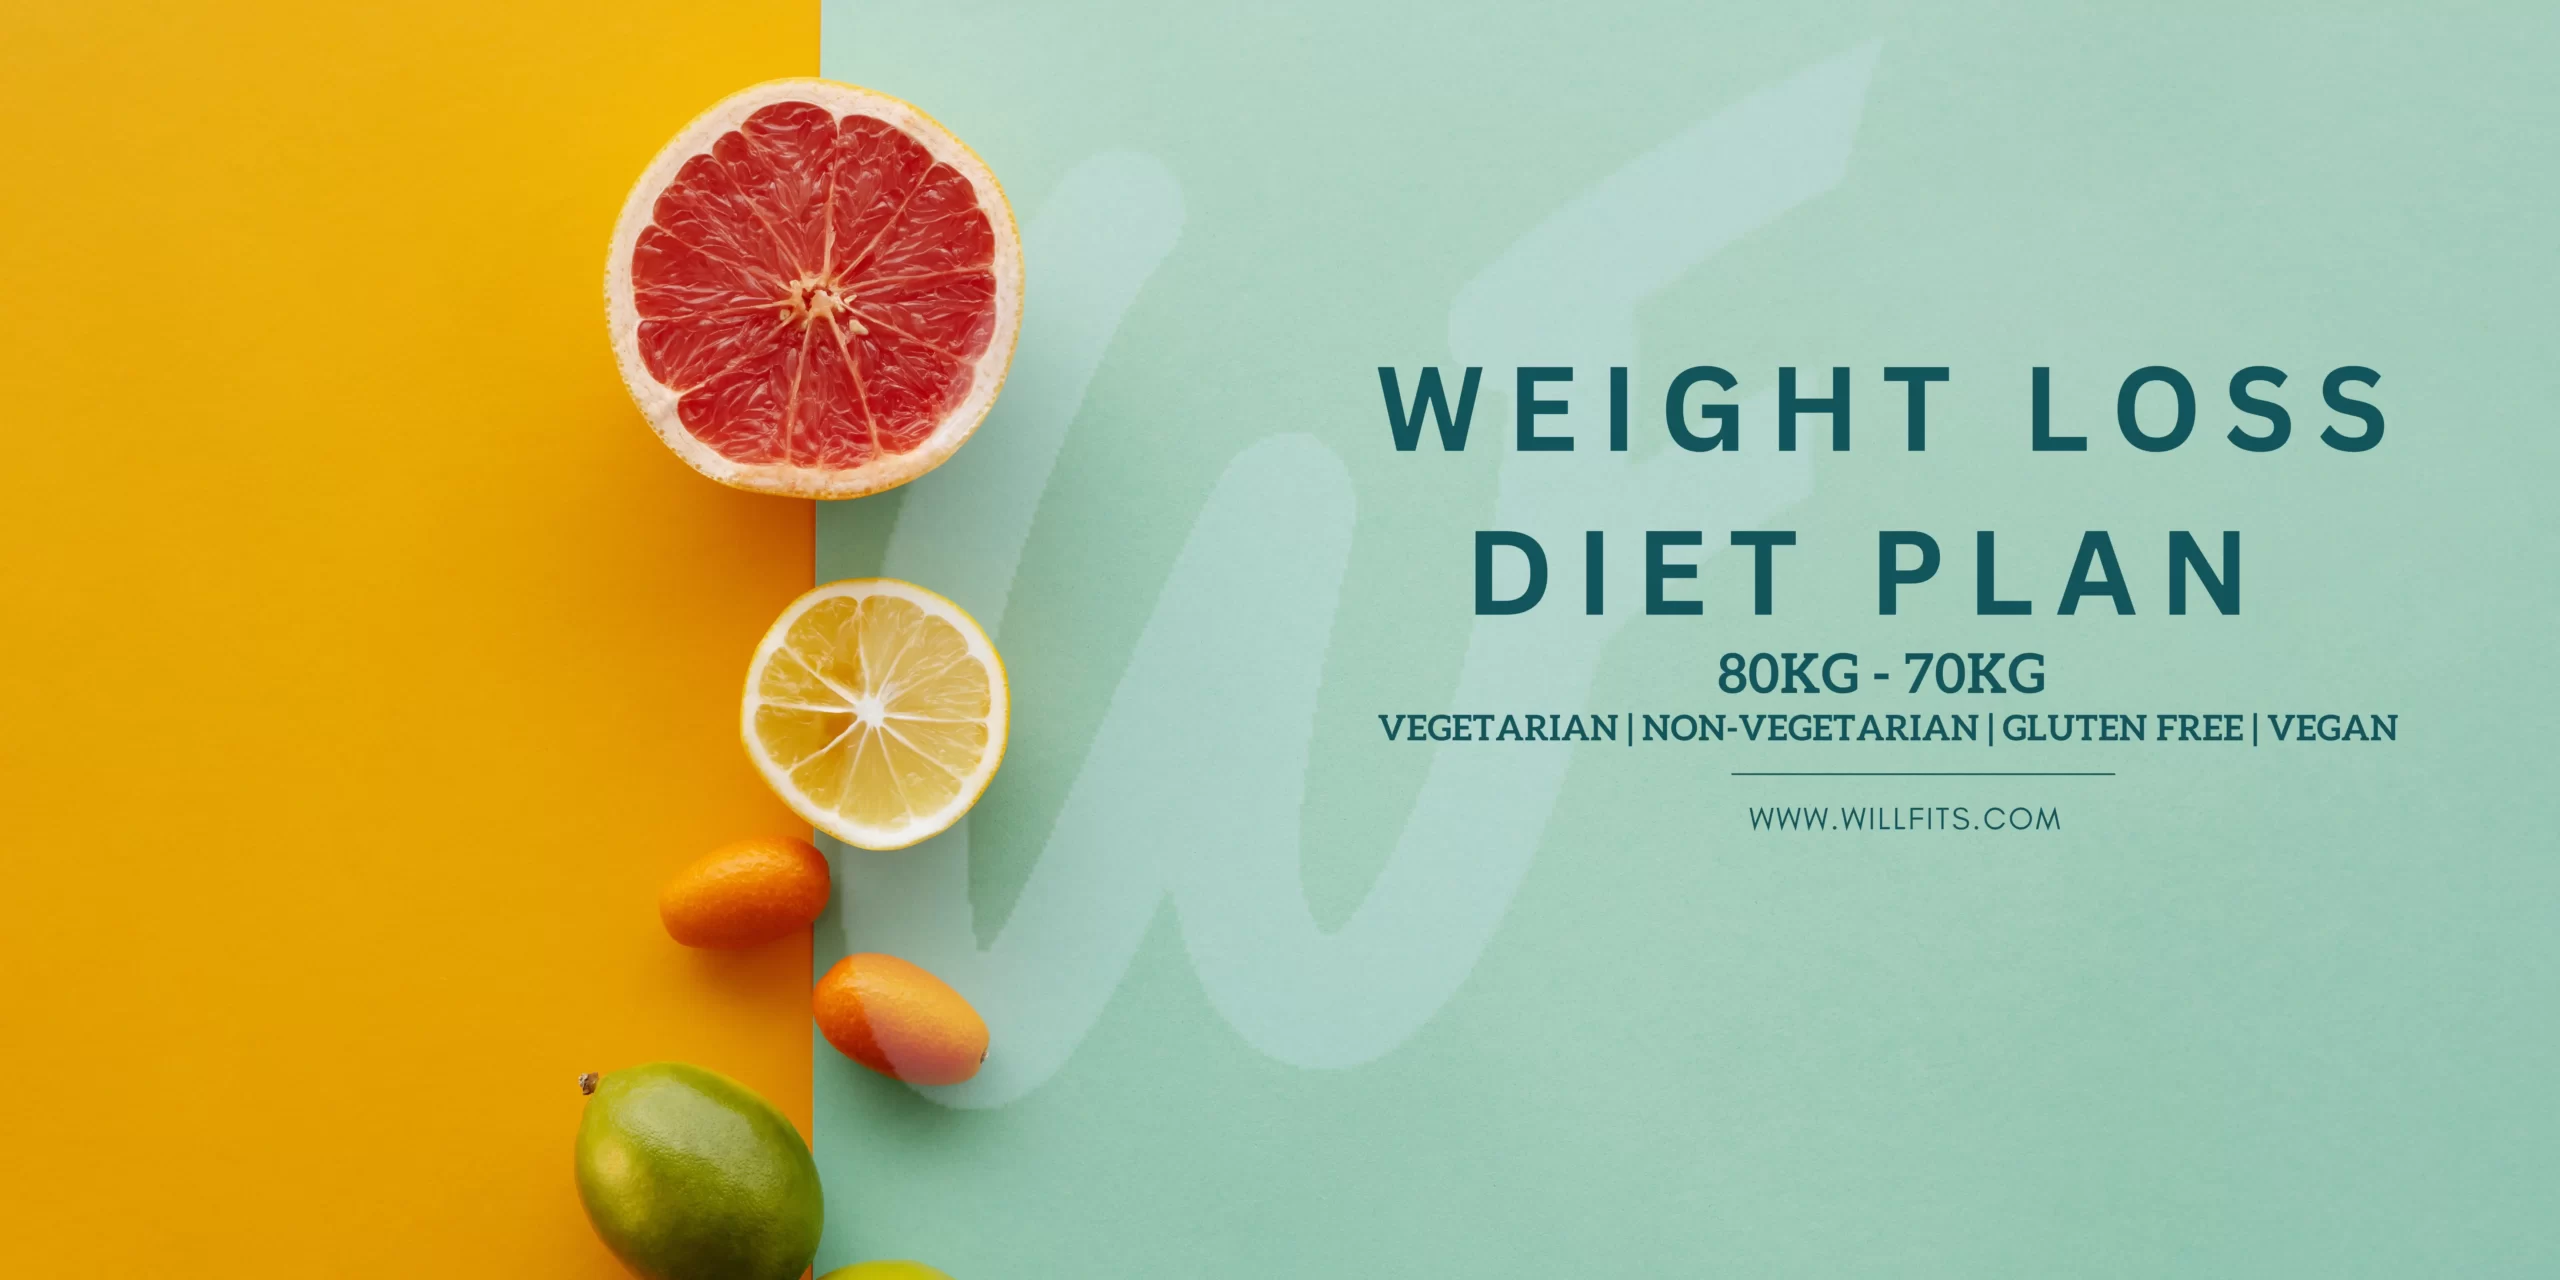 You are currently viewing Weight Loss Diet Plan 80KG – 70KG With Willfits.com